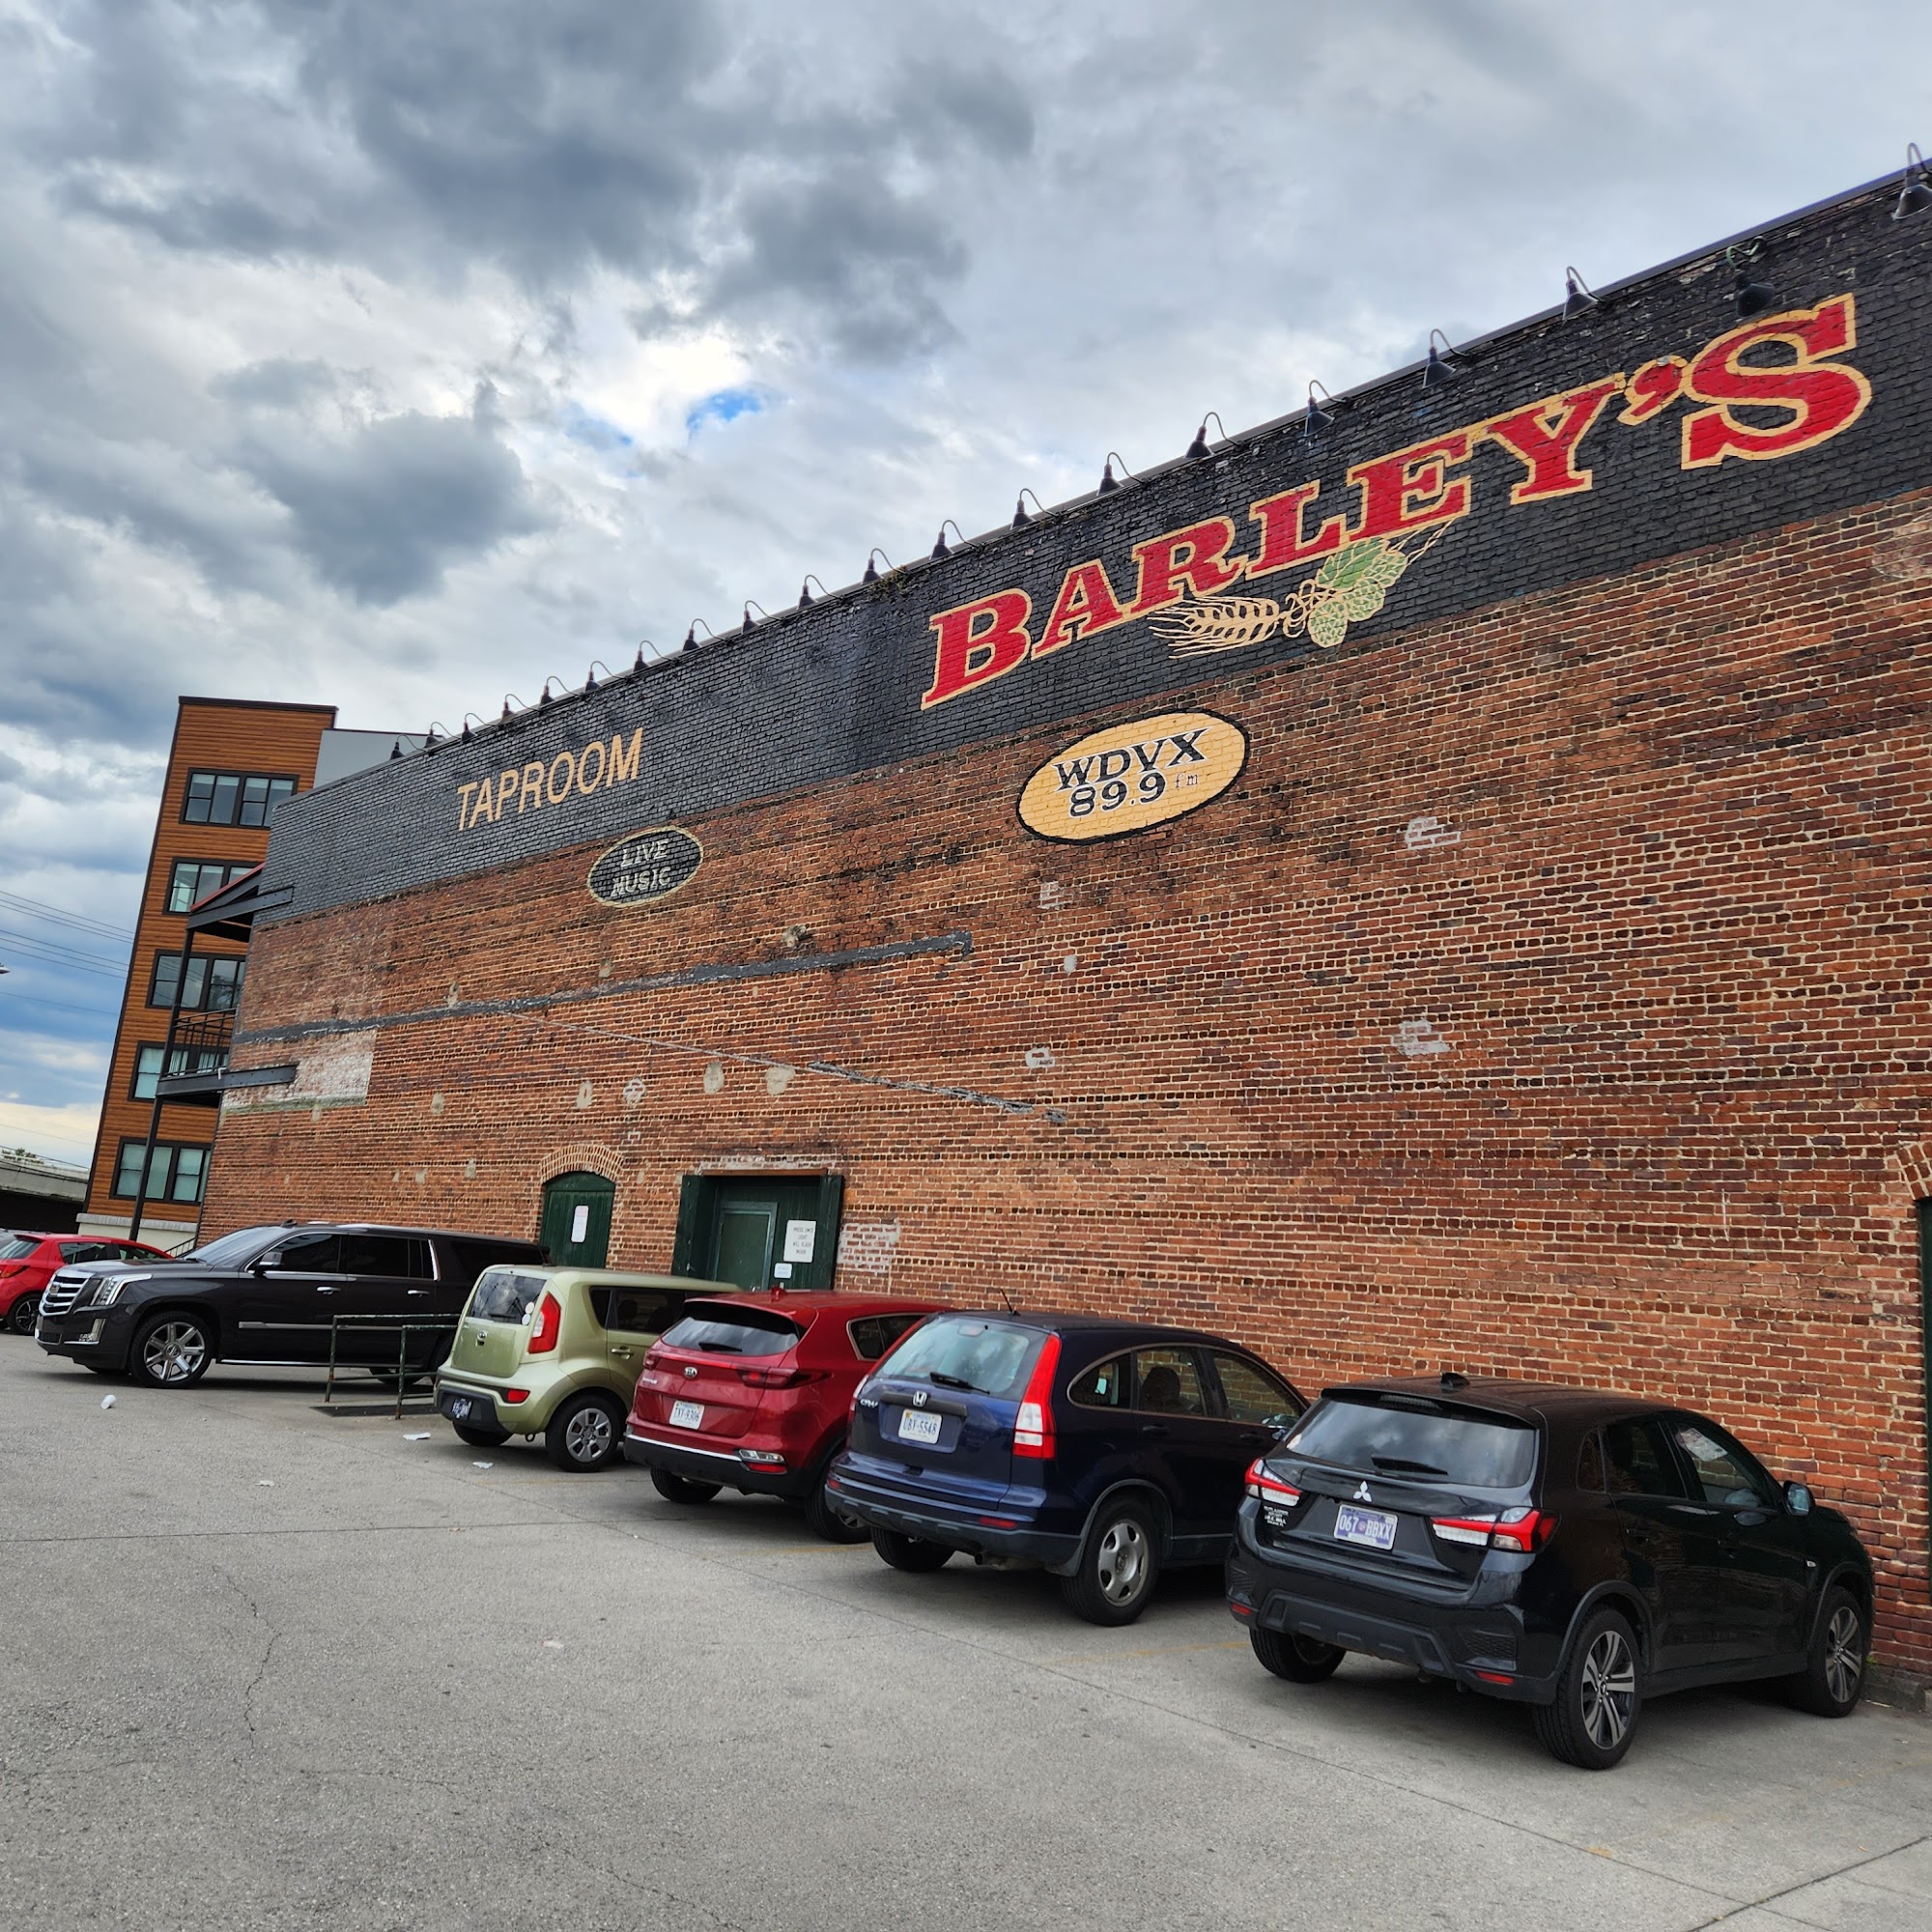 Barley's Taproom and Pizzeria